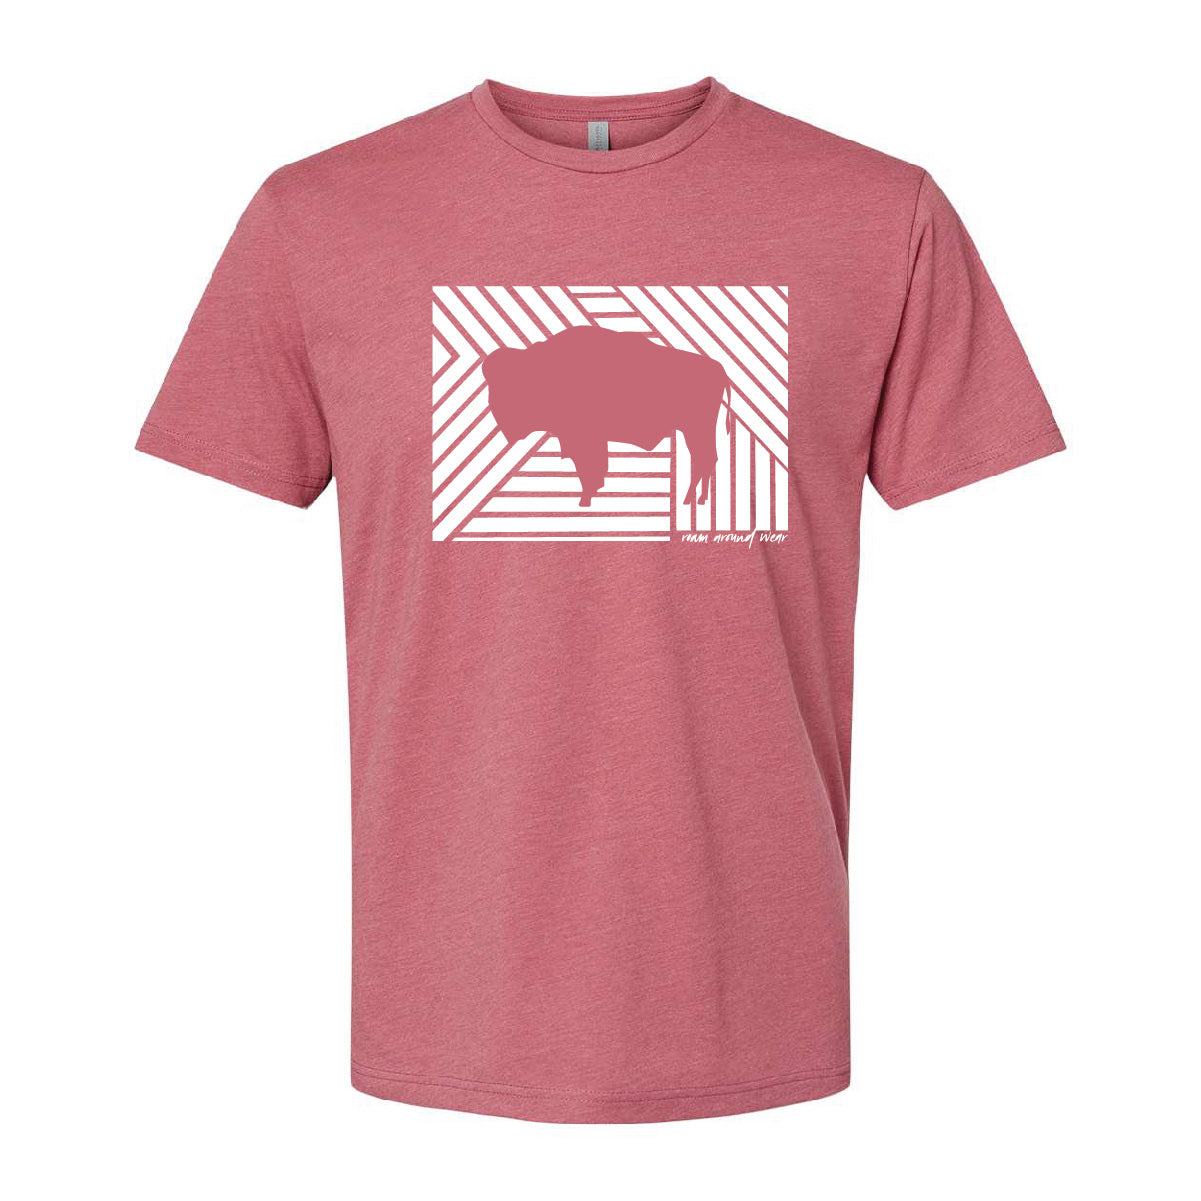 Roam Bison unisex Tee. Pink tee. Wyoming Tee. Western Tee. Roam Around Wear is a Wyoming t-shirt company based out of Gillette, Wyoming